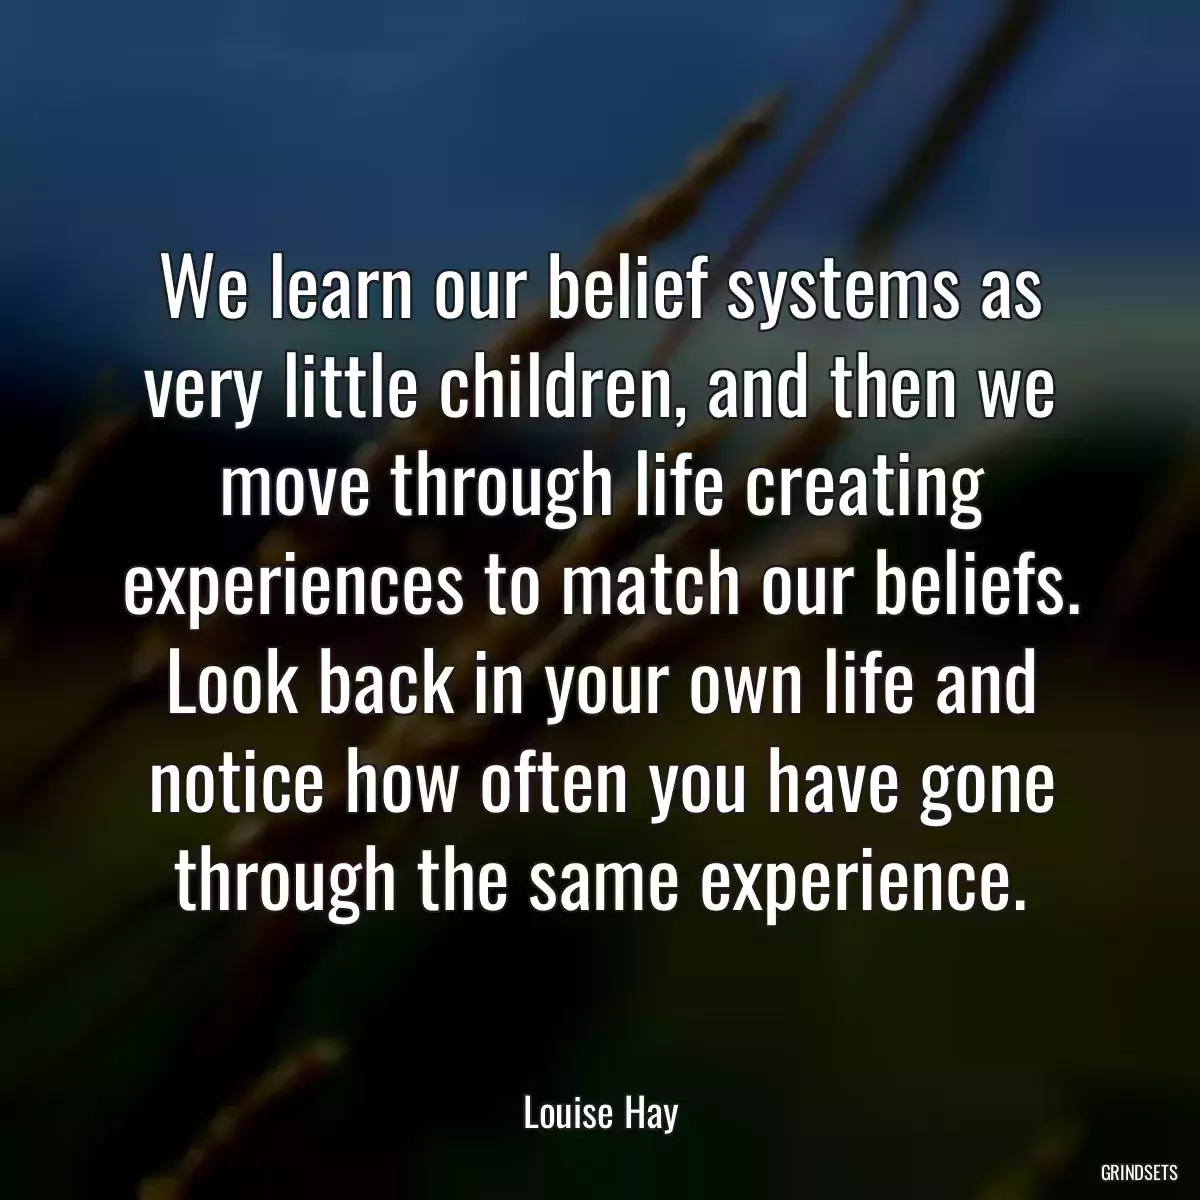 We learn our belief systems as very little children, and then we move through life creating experiences to match our beliefs. Look back in your own life and notice how often you have gone through the same experience.